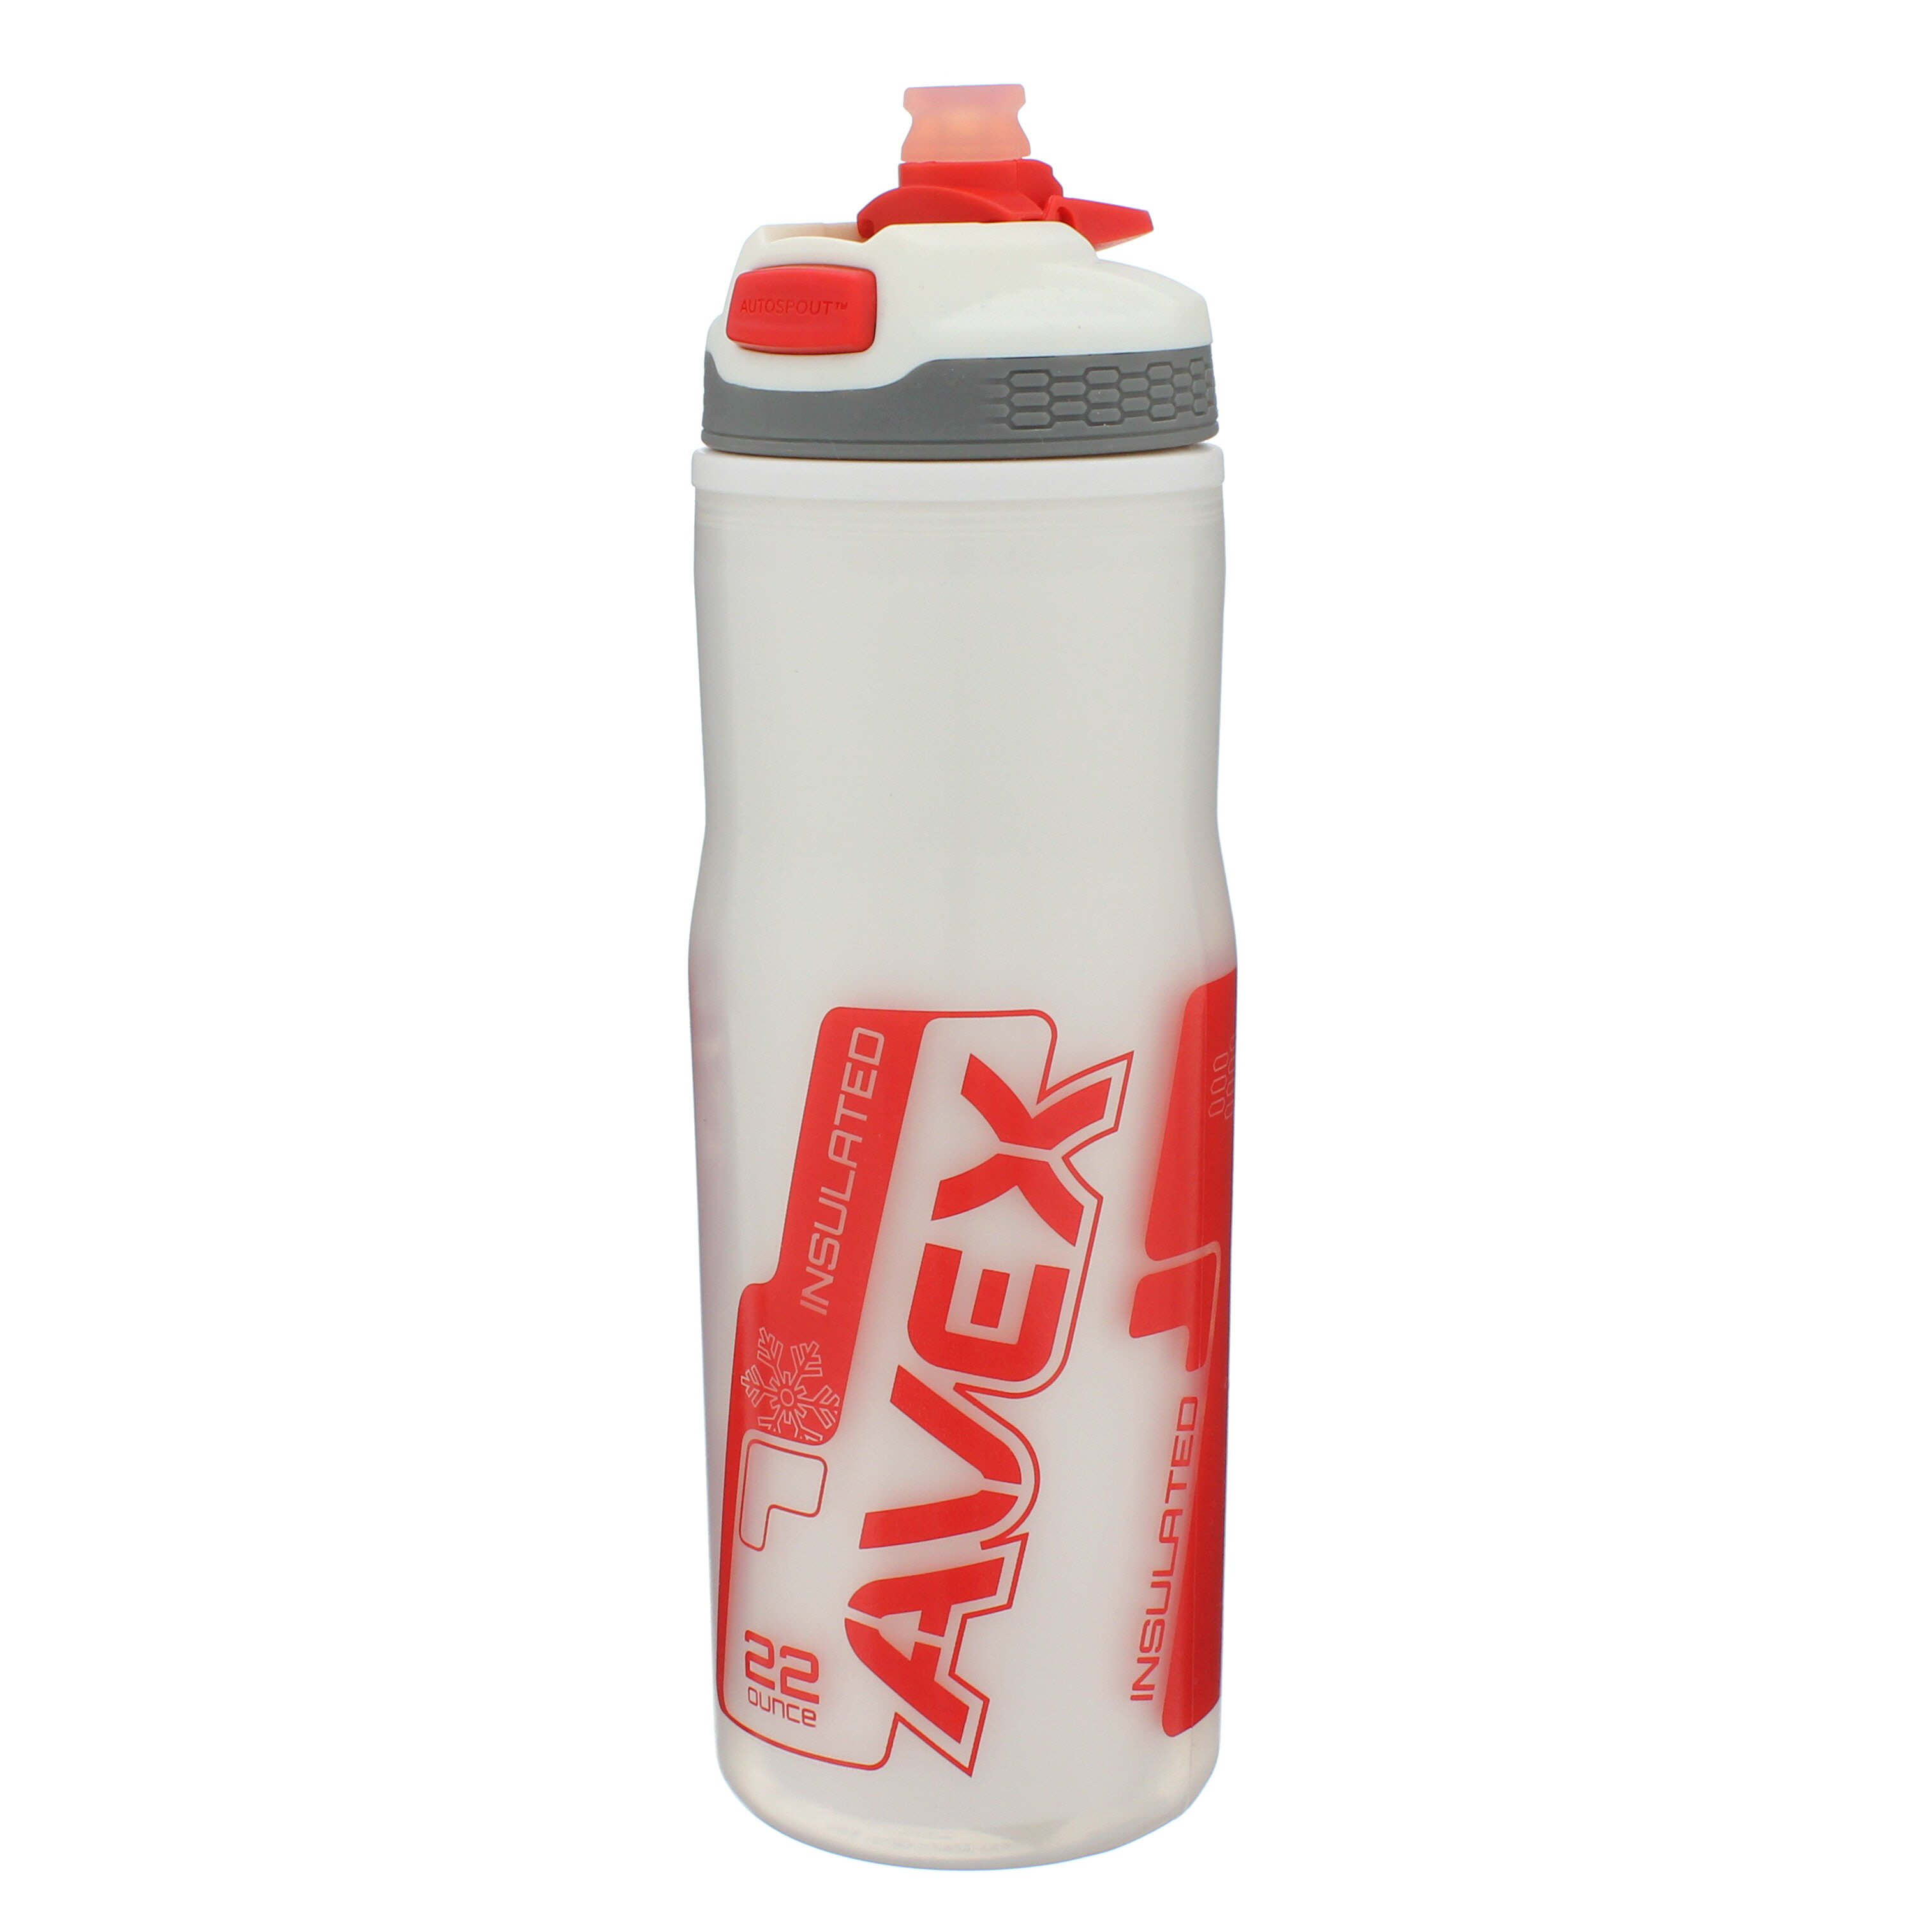 Avex Pecos Autoseal Water Bottle Review - Active Gear Review